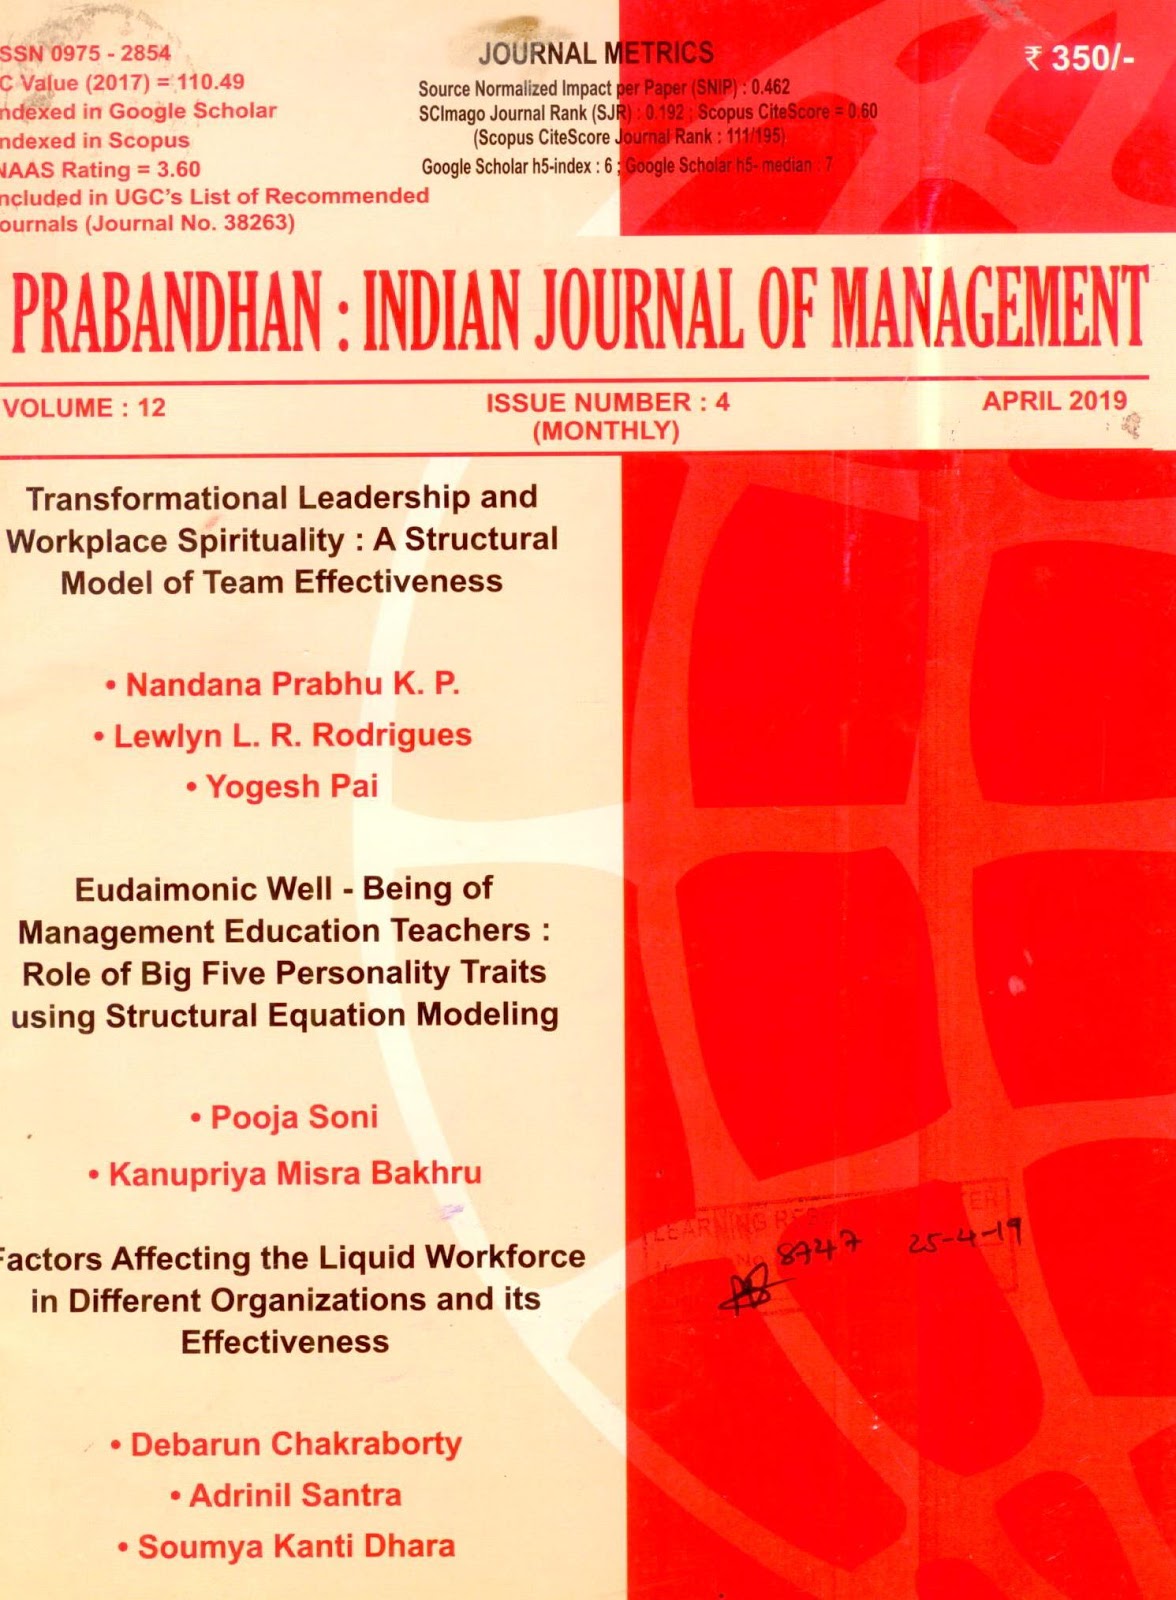 http://www.indianjournalofmanagement.com/index.php/pijom/issue/view/8447